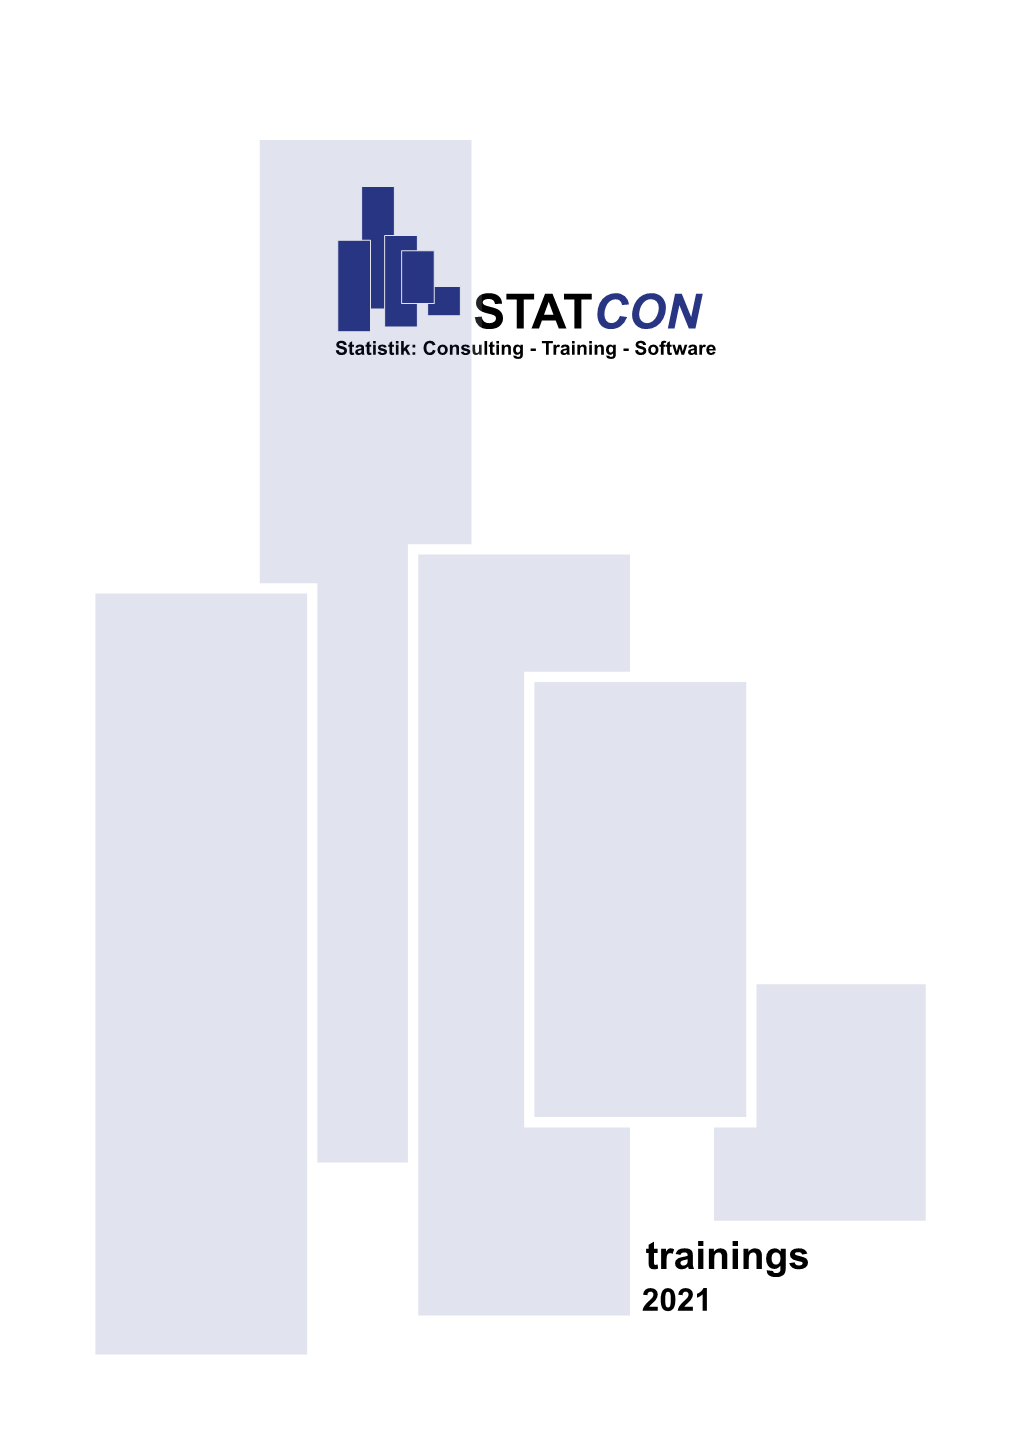 STATCON Statistik: Consulting - Training - Software